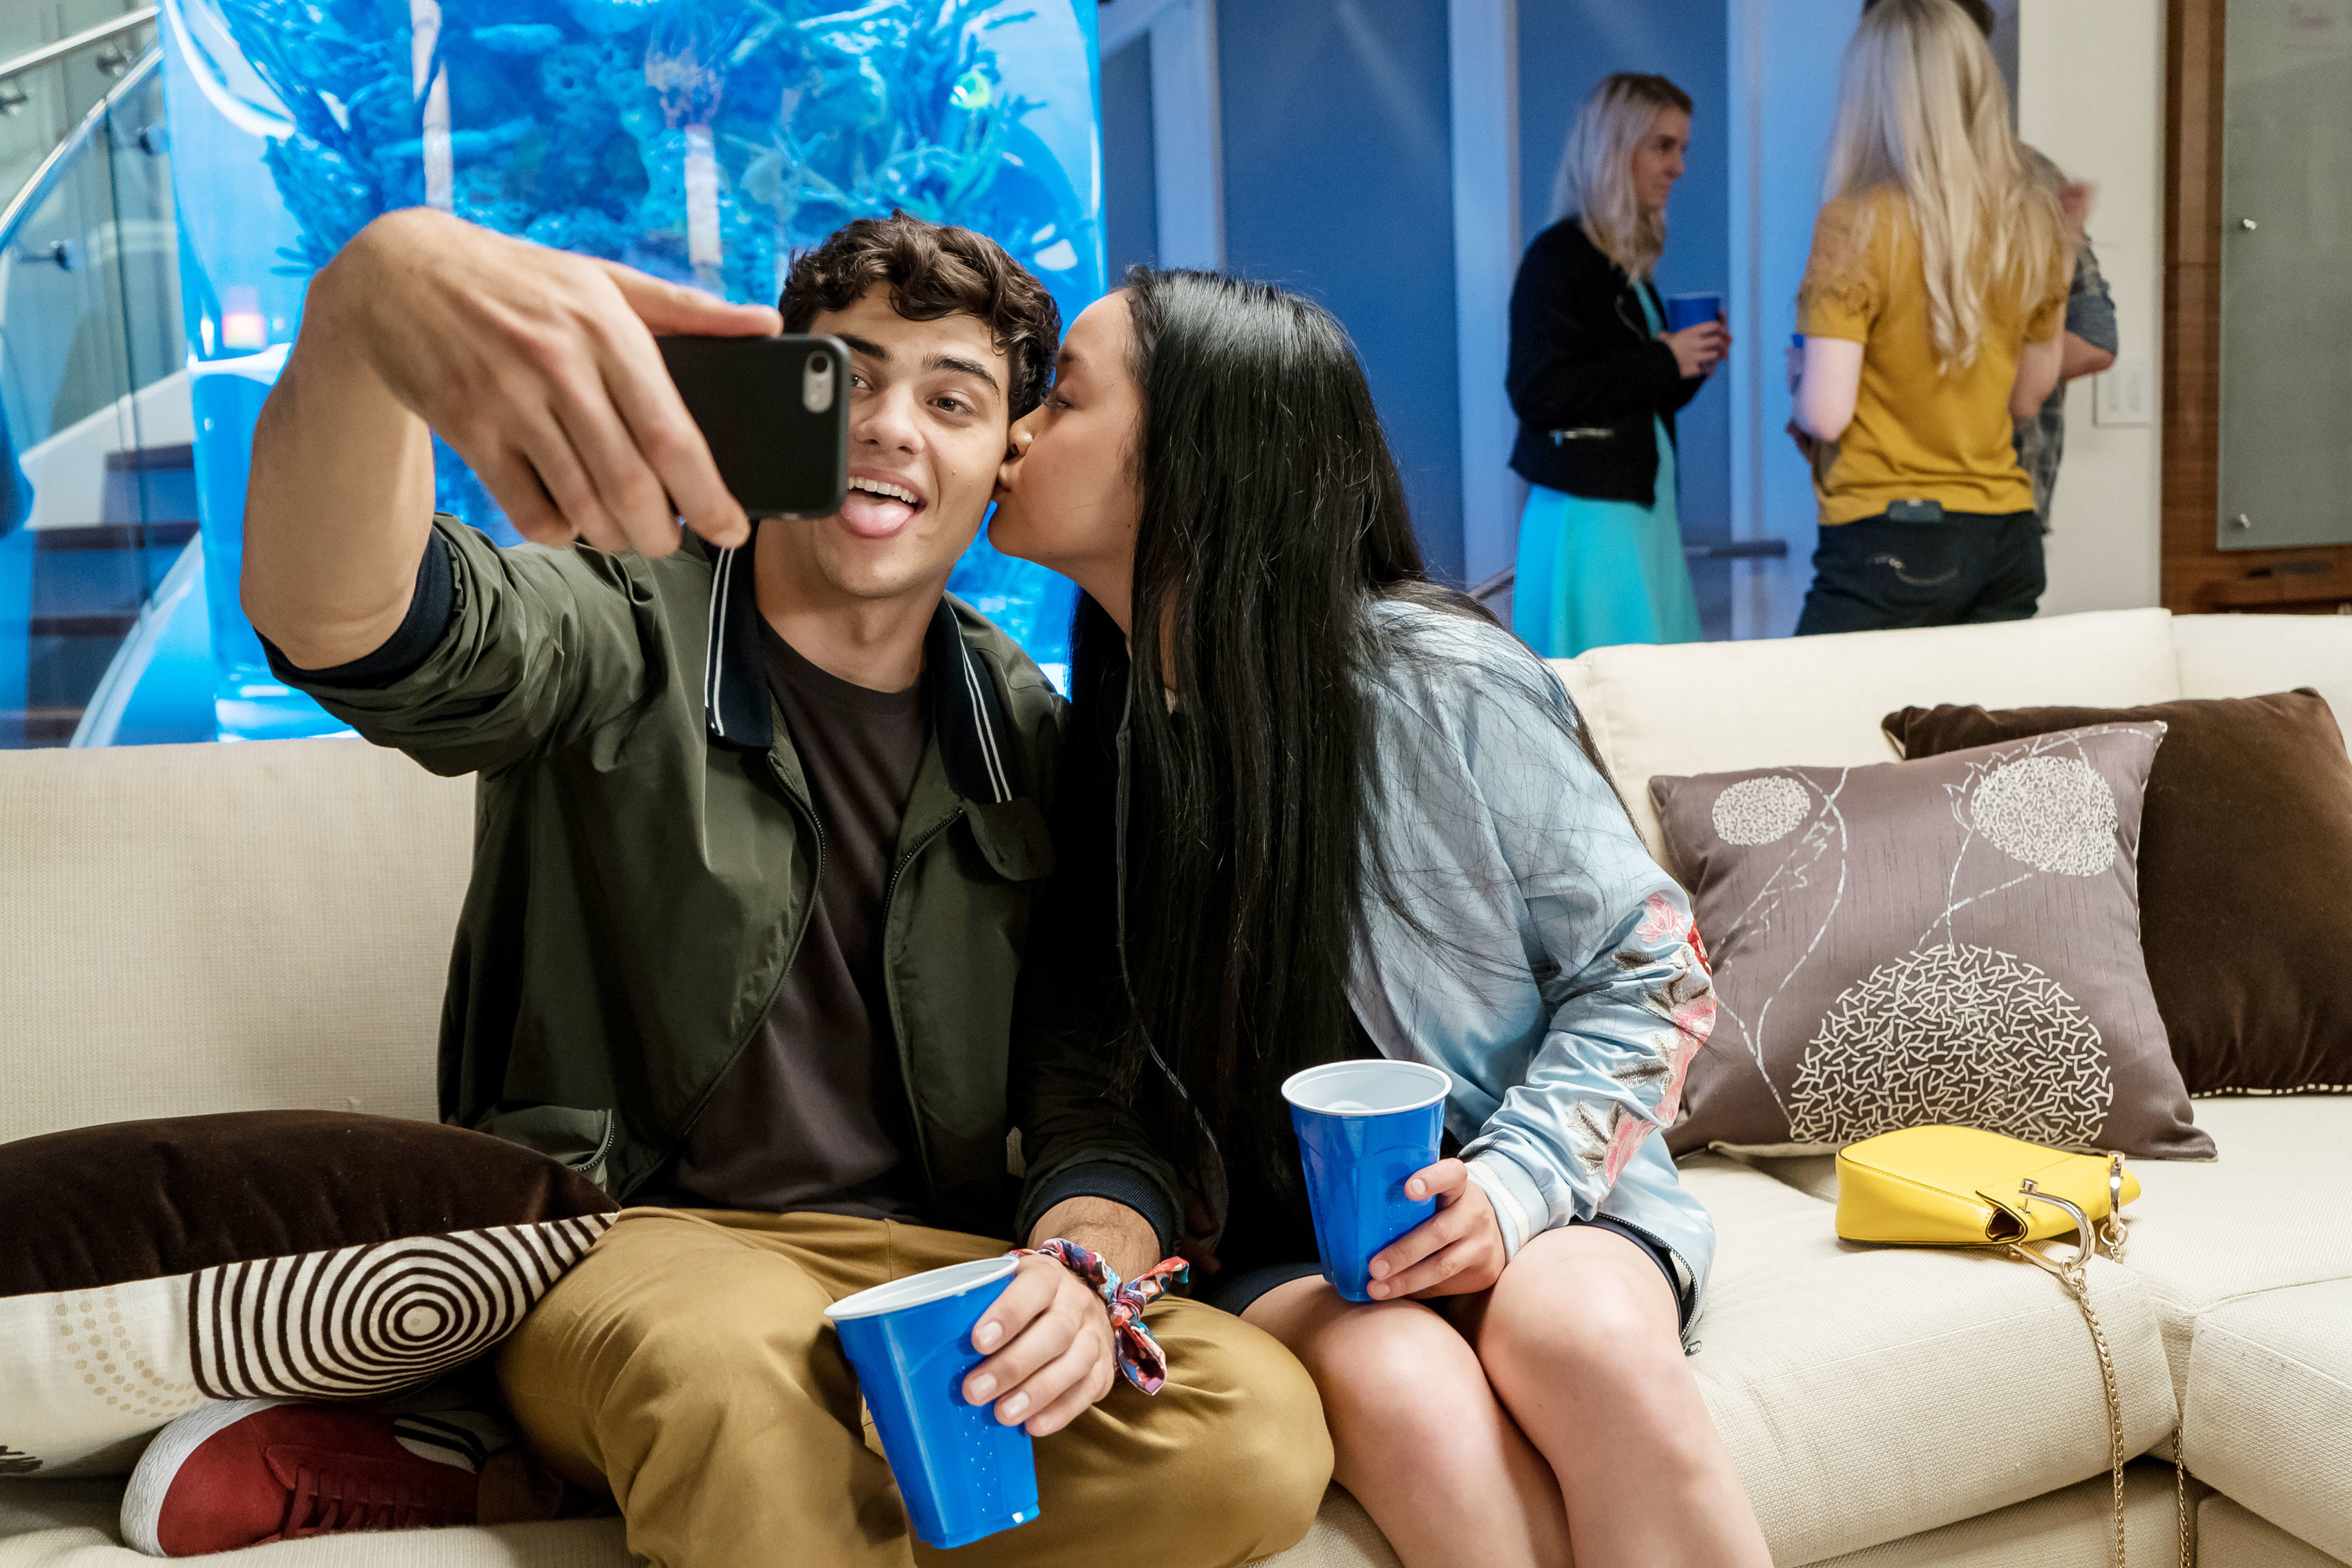 Peter and Lara Jean taking a selfie while sitting on a couch